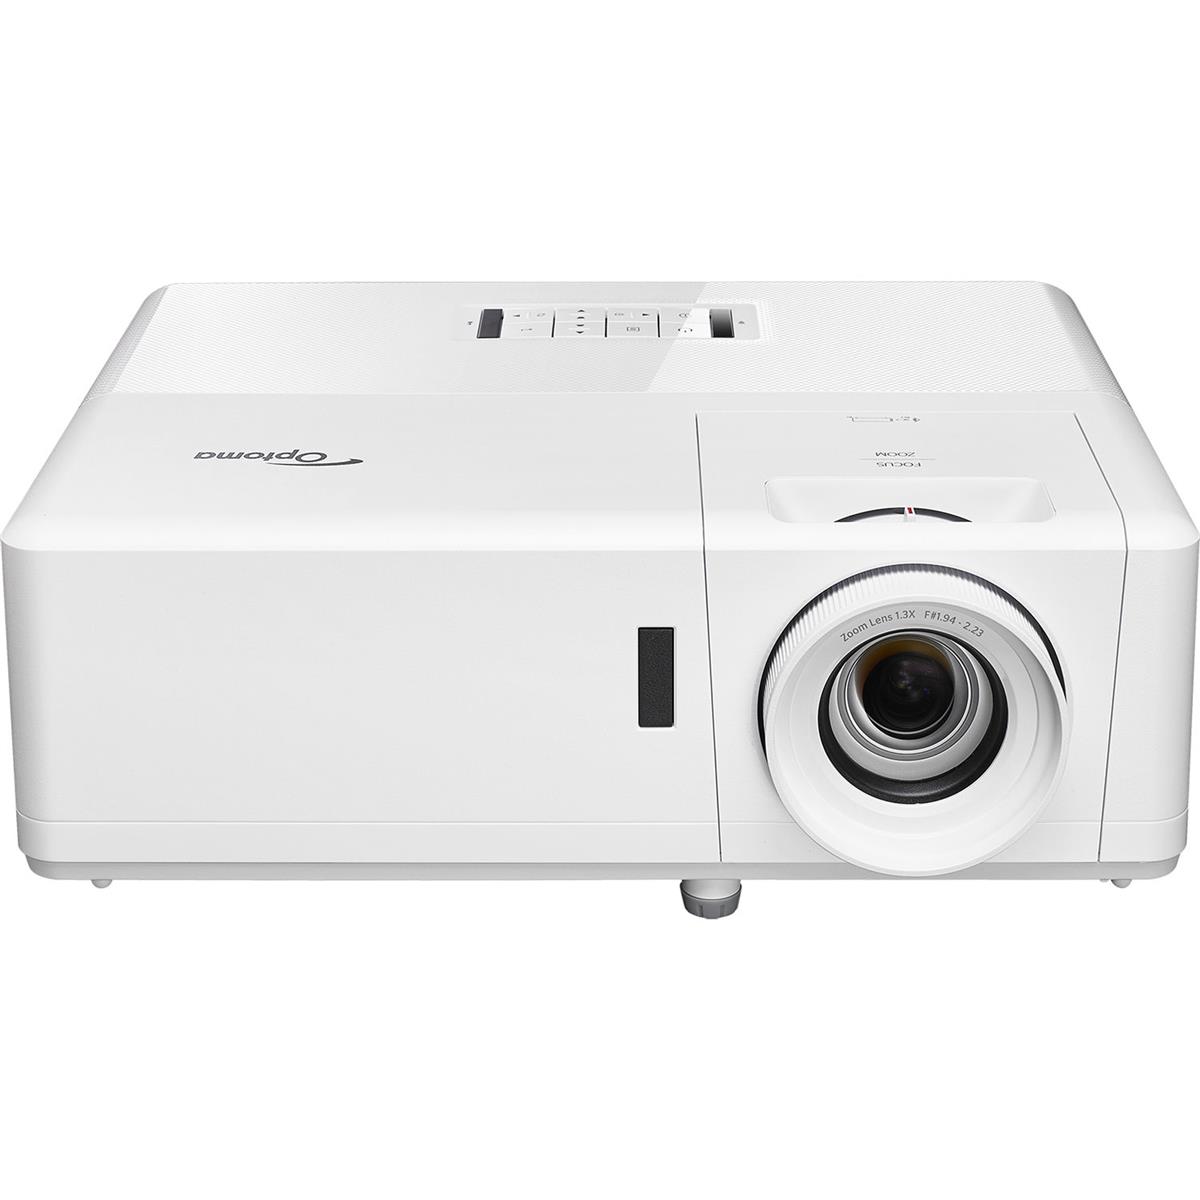 Full HD Laser DLP Home Theater Projector, 4000 Lumens - Optoma HZ39HDR